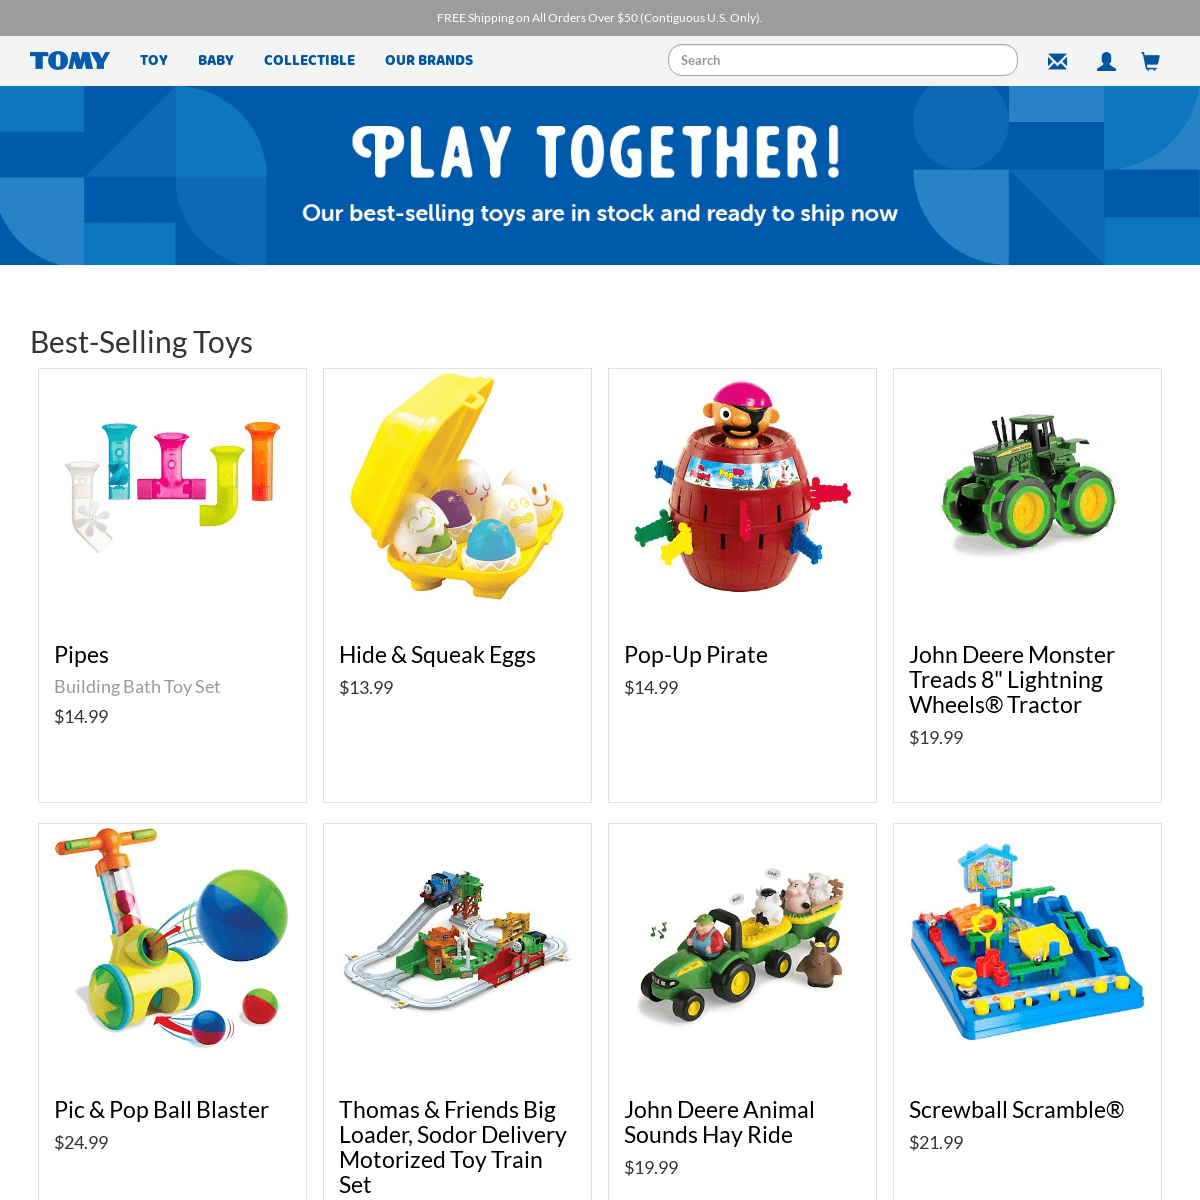 A complete backup of tomy.com